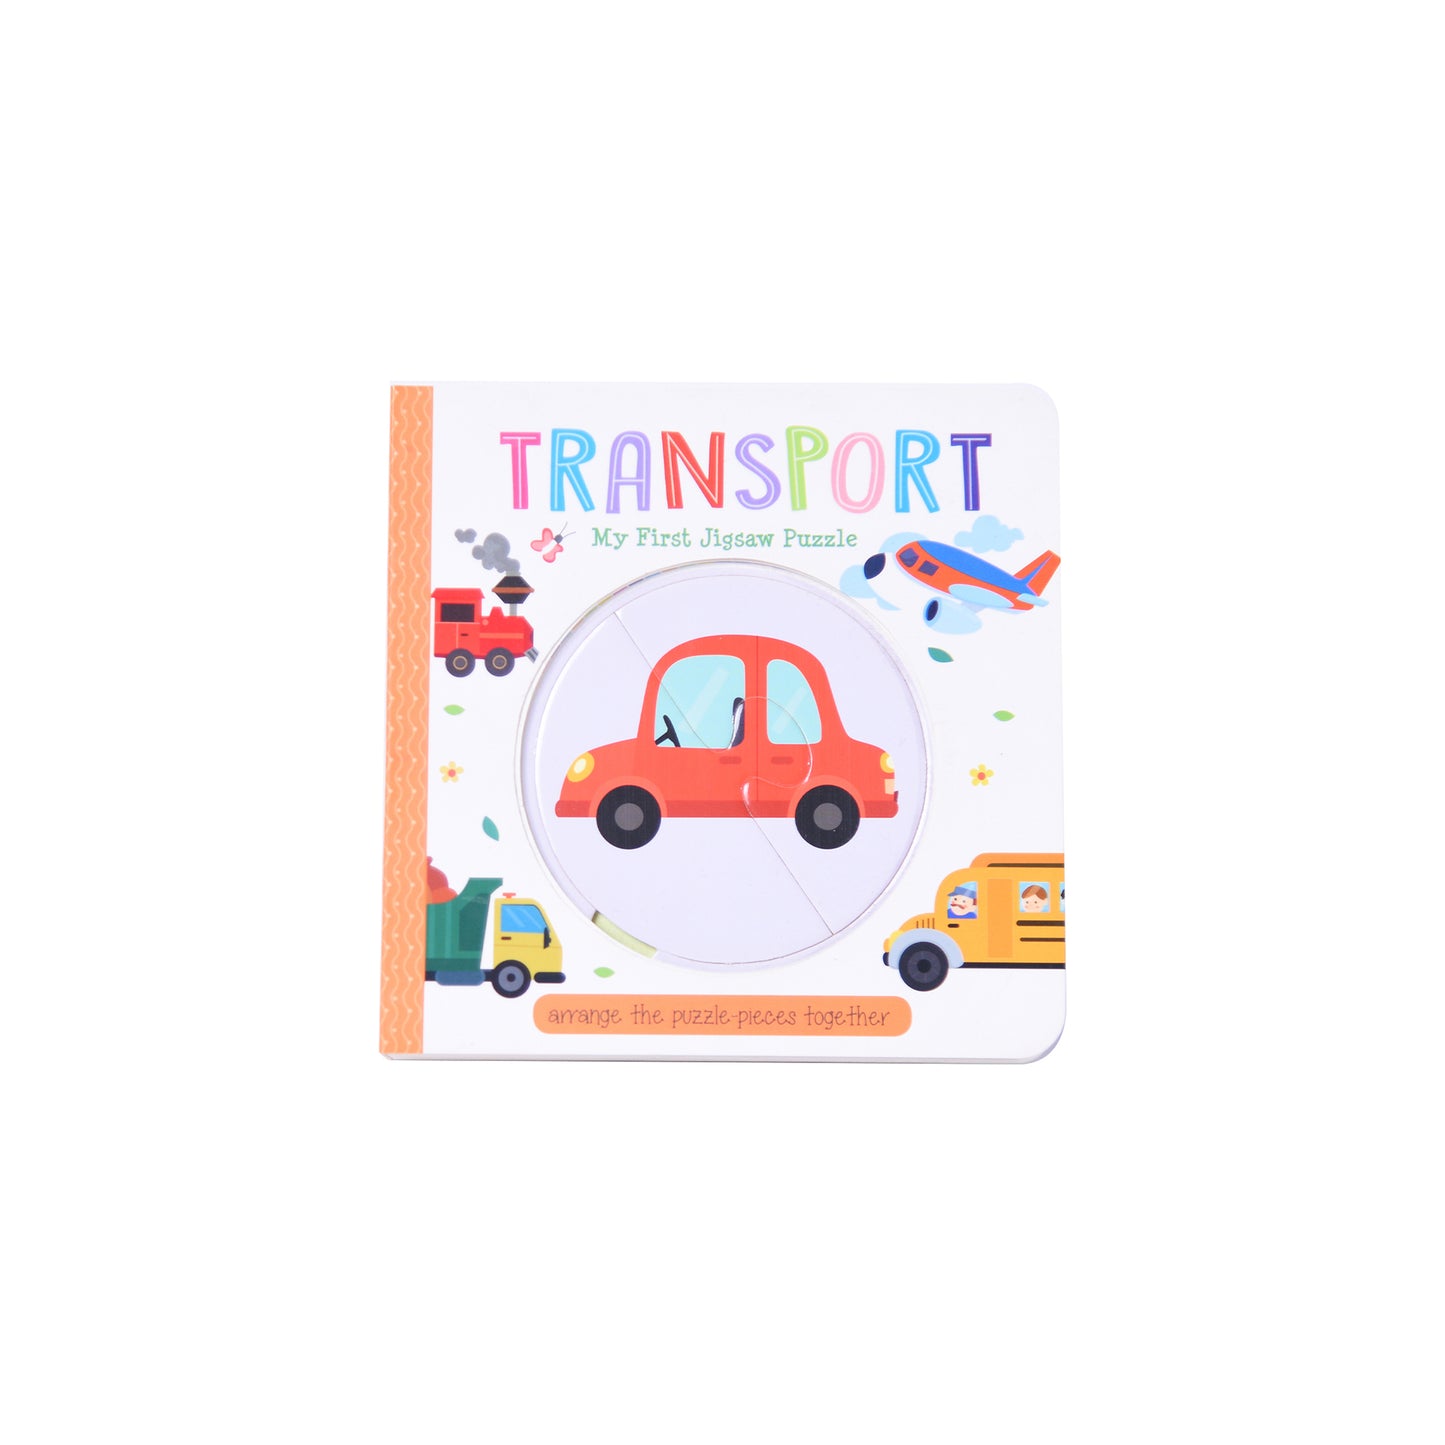 Transport - My First Jigsaw Puzzle